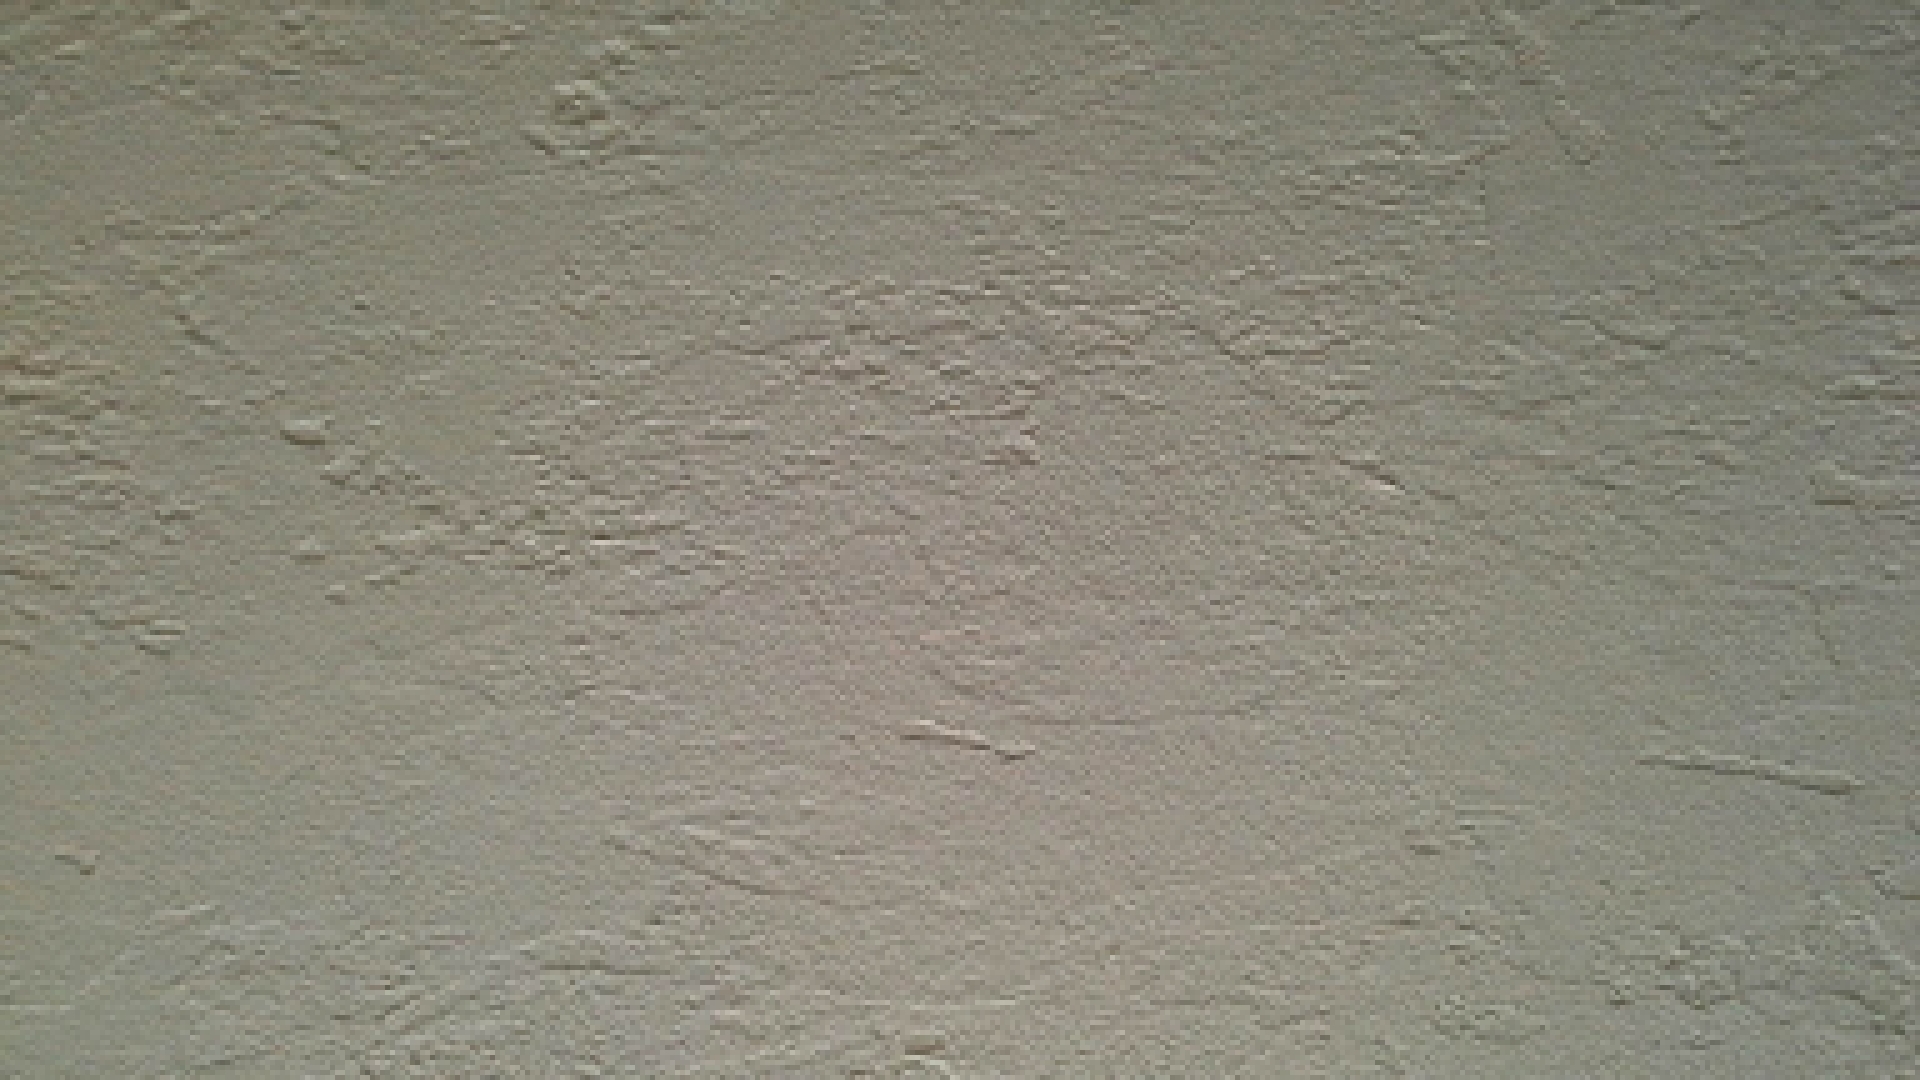 The method of priming a concrete wall before applying the finish